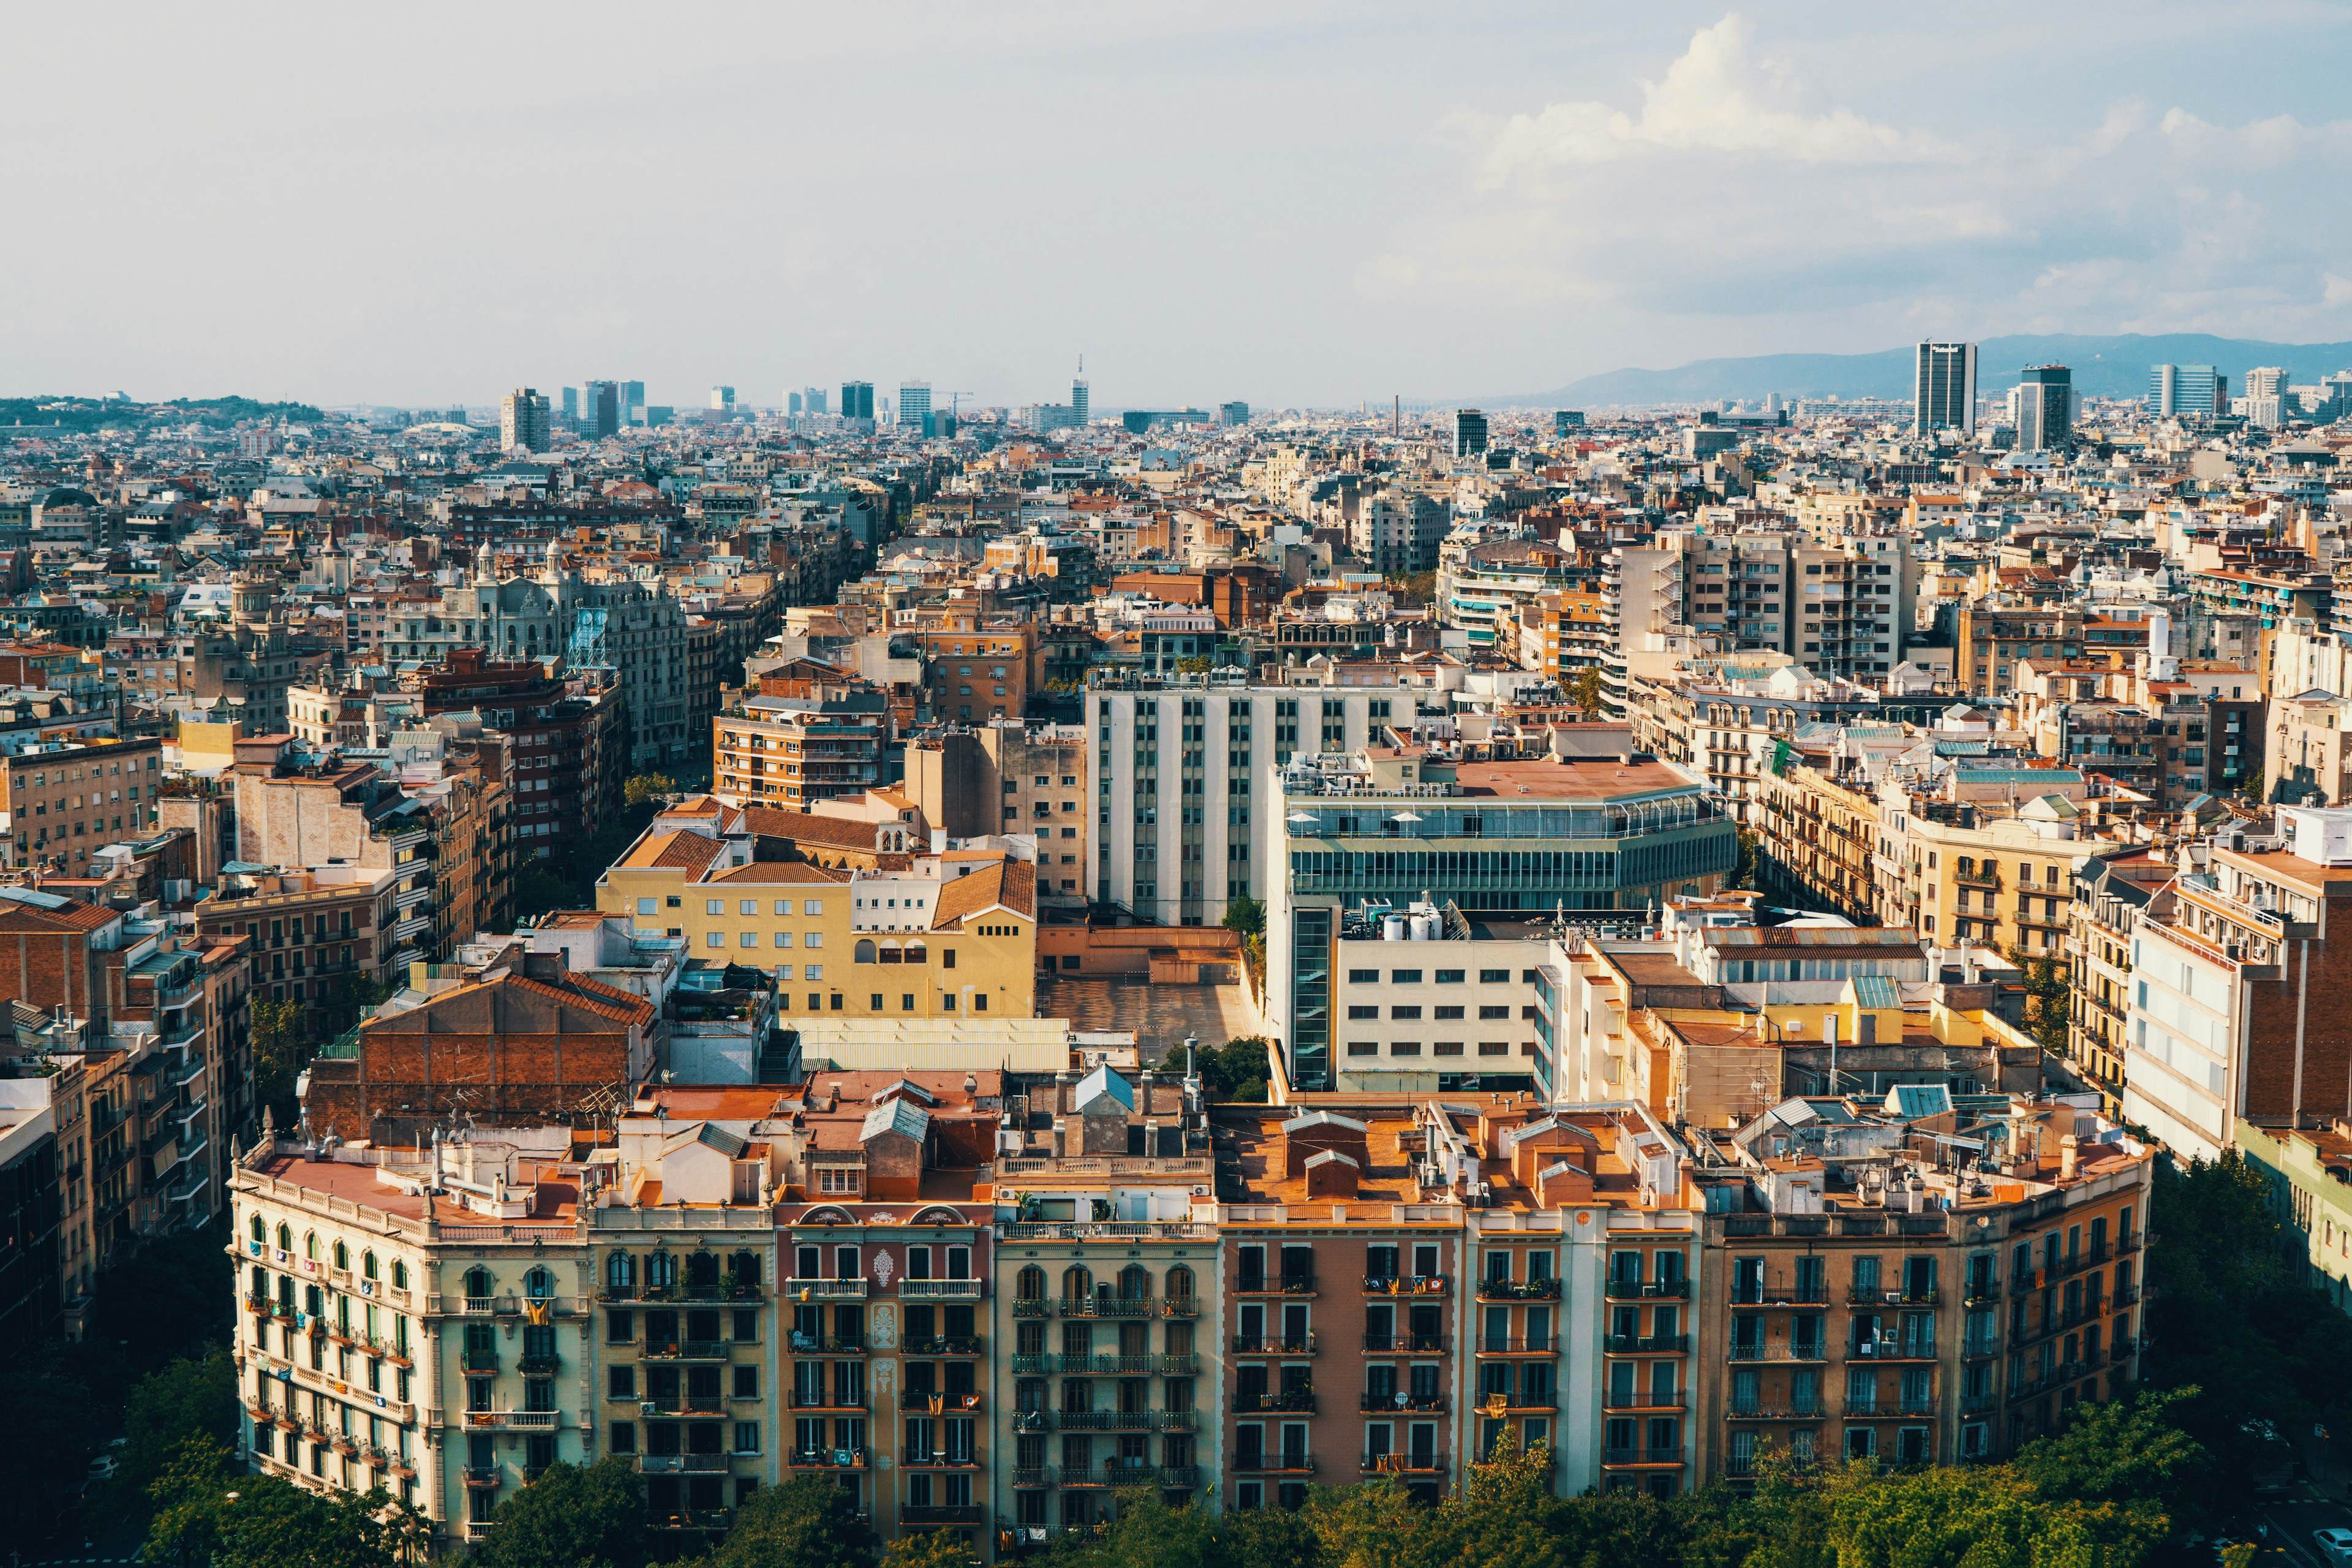 Best place to have Spanish immersion: Barcelona